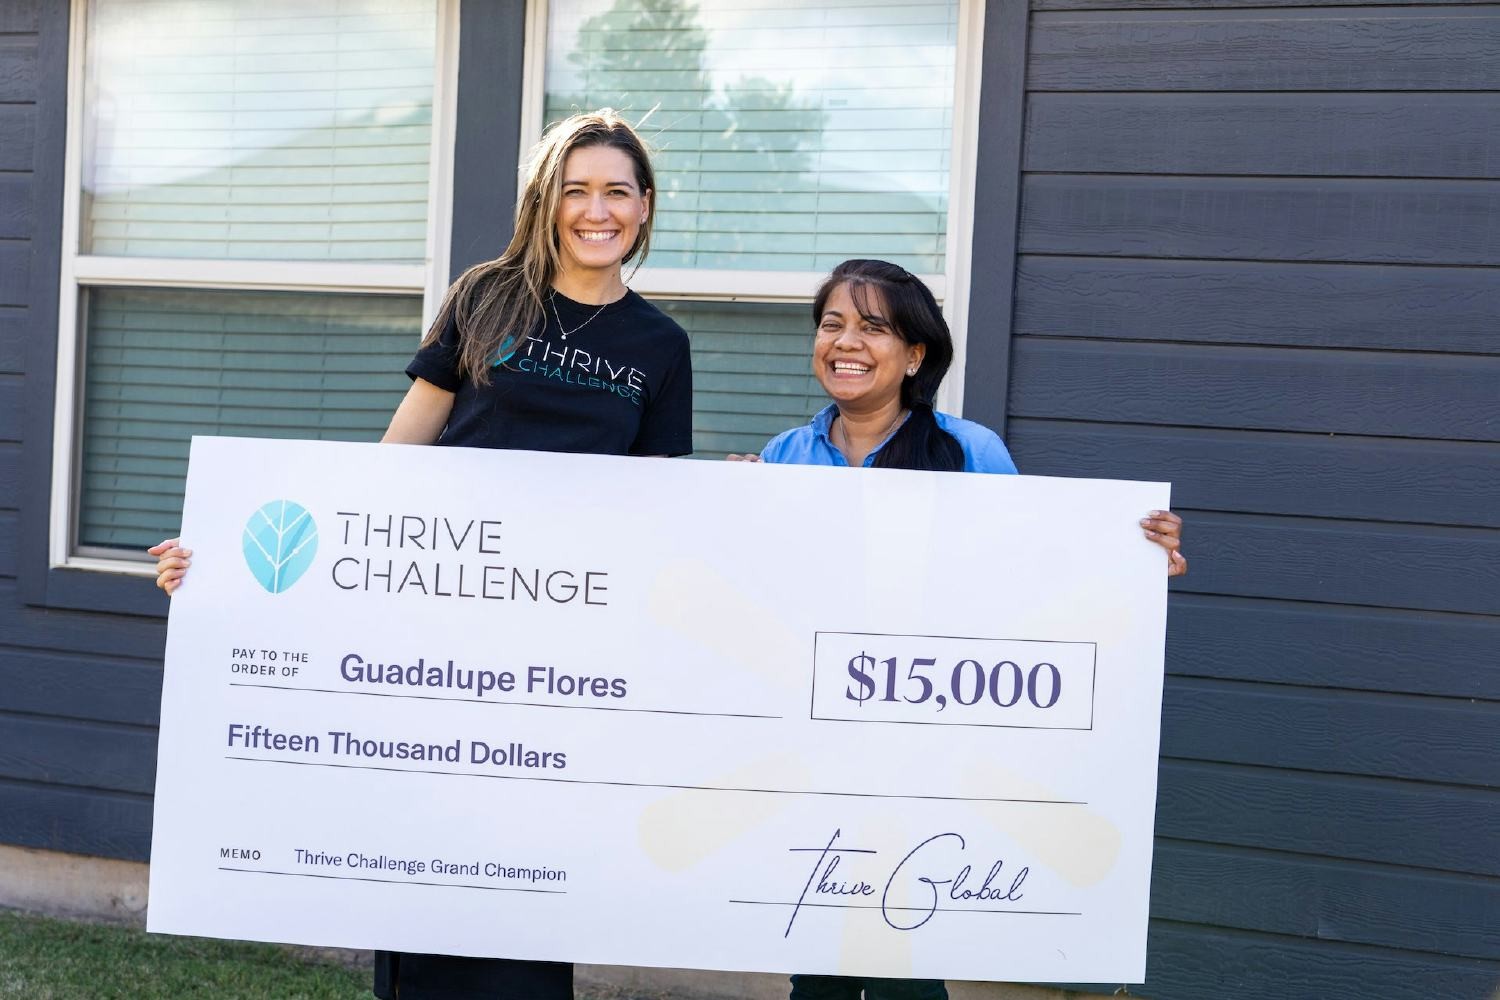 Thrive's SVP of Customer Success MT Grant presents a prize to a Thrive Challenge Grand Champion.